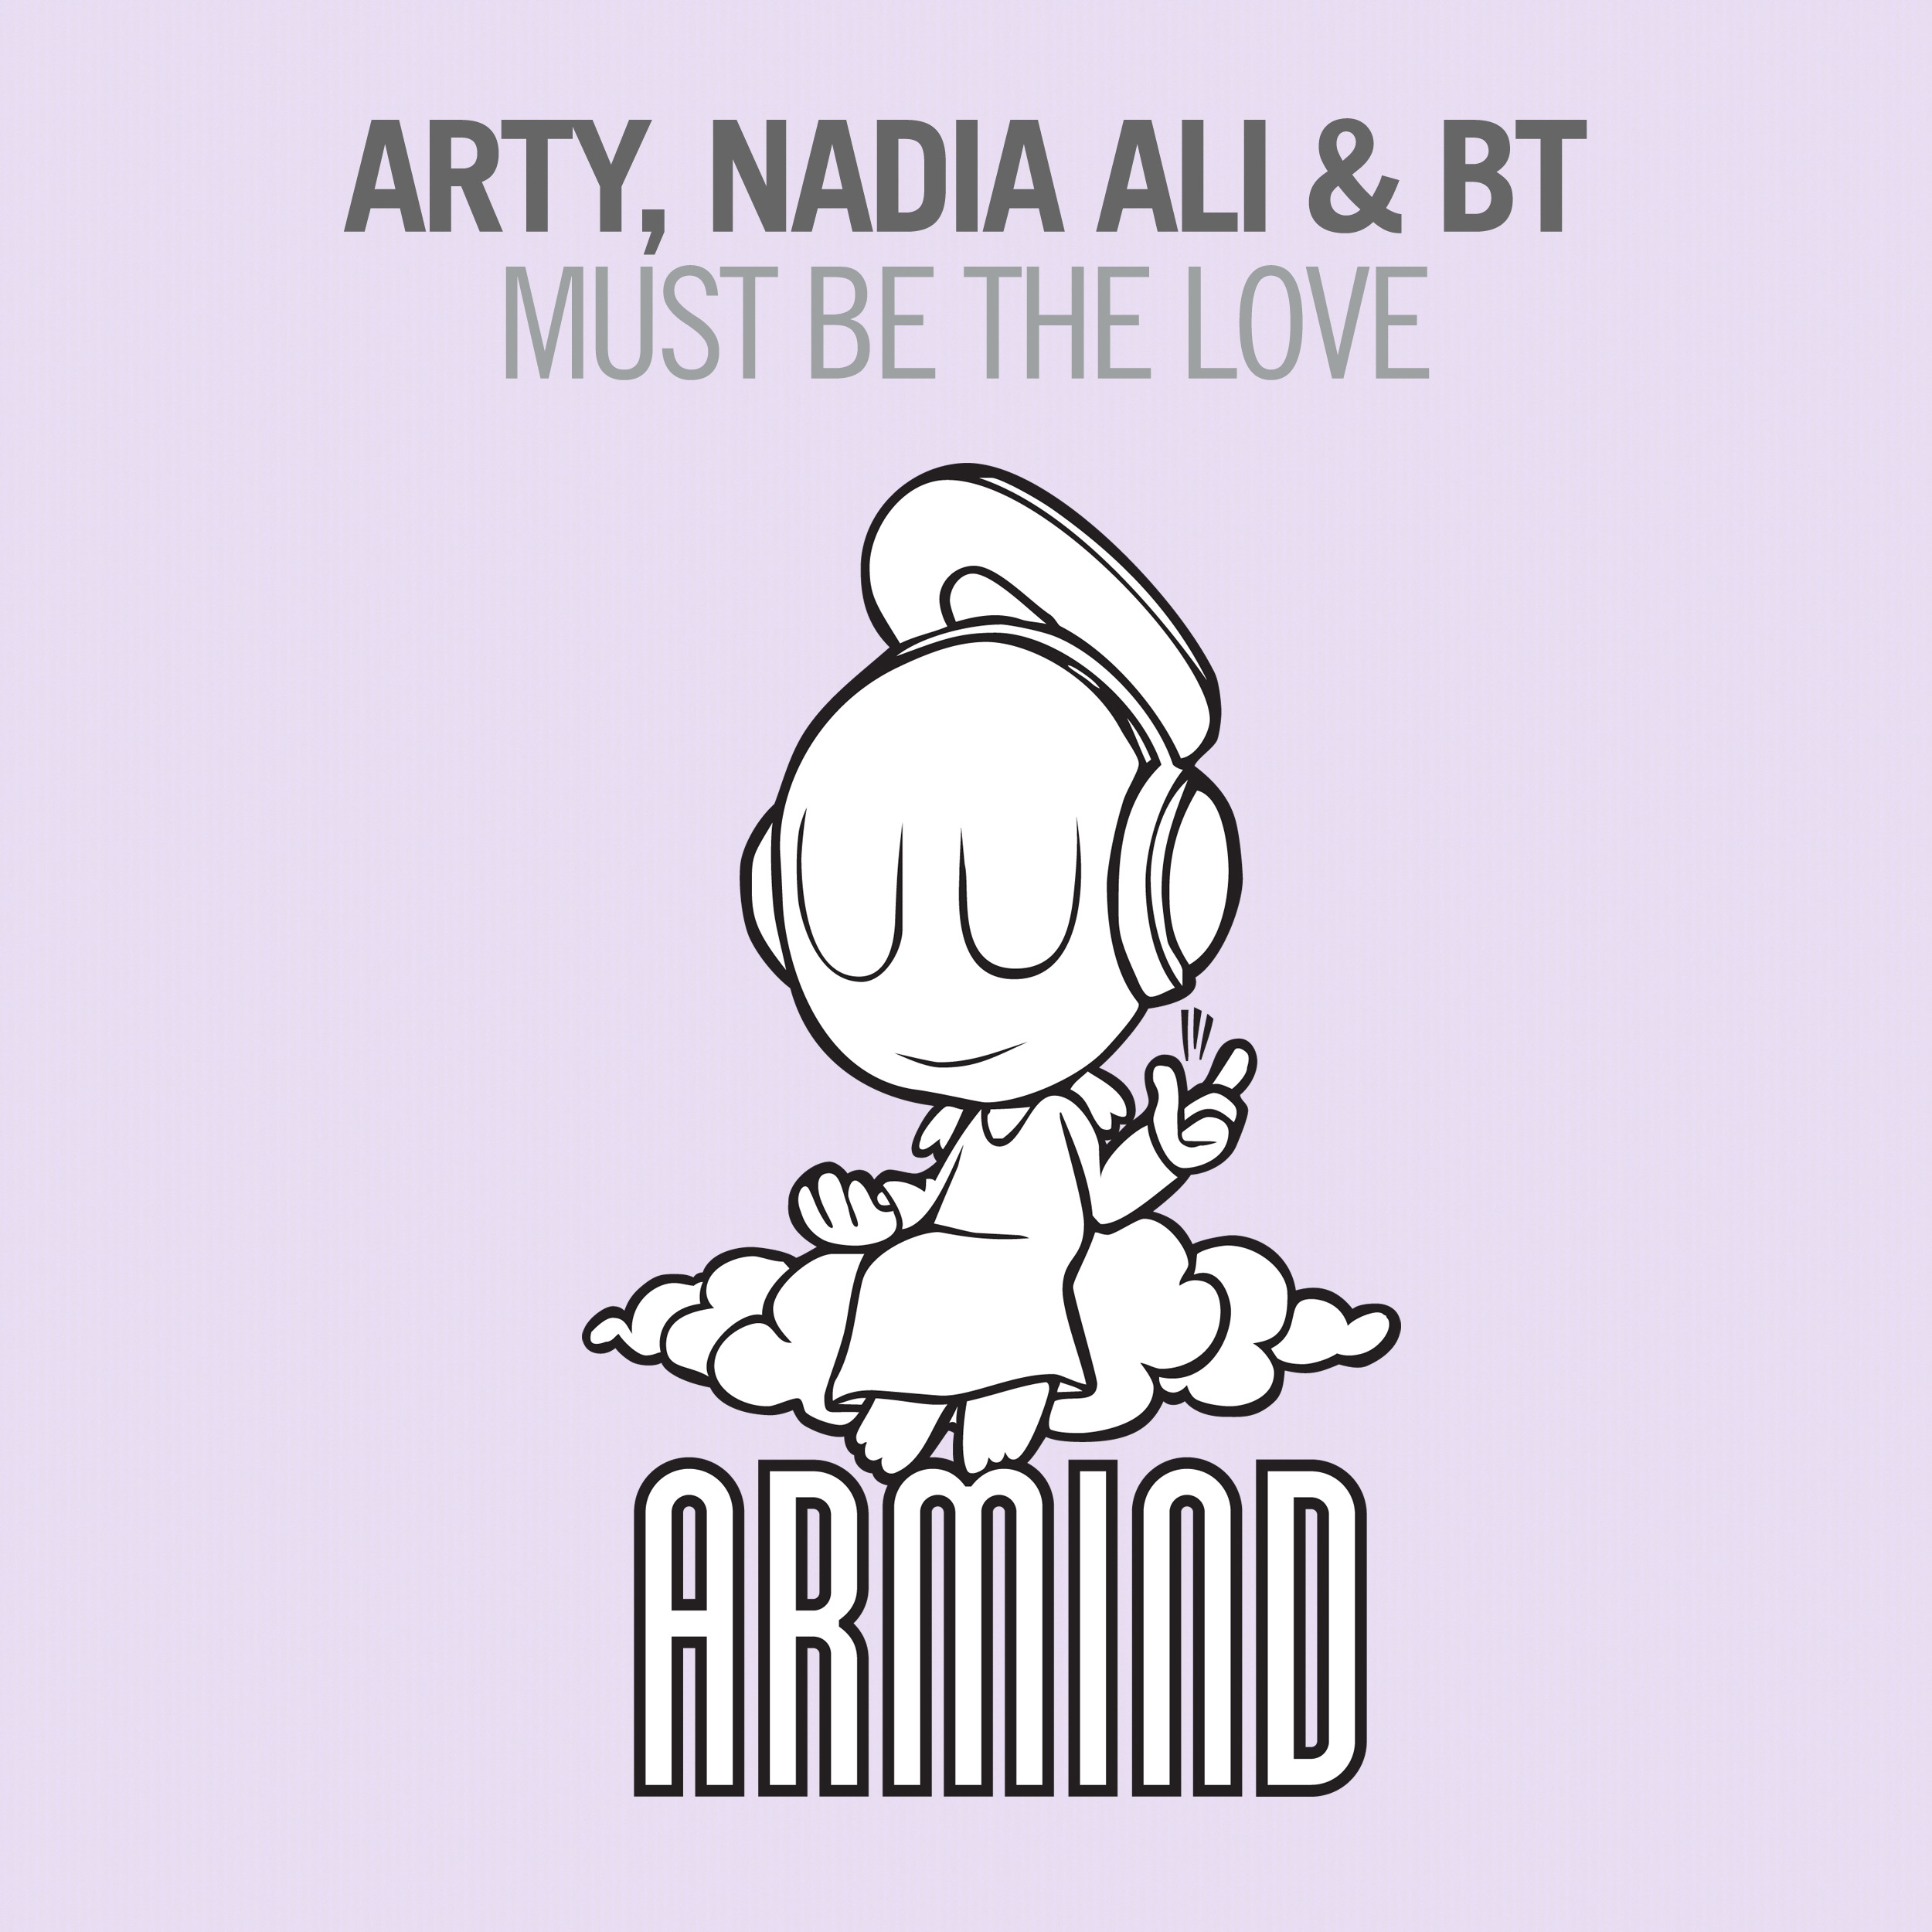 BT & ARTY featuring Nadia Ali — Must Be The Love cover artwork